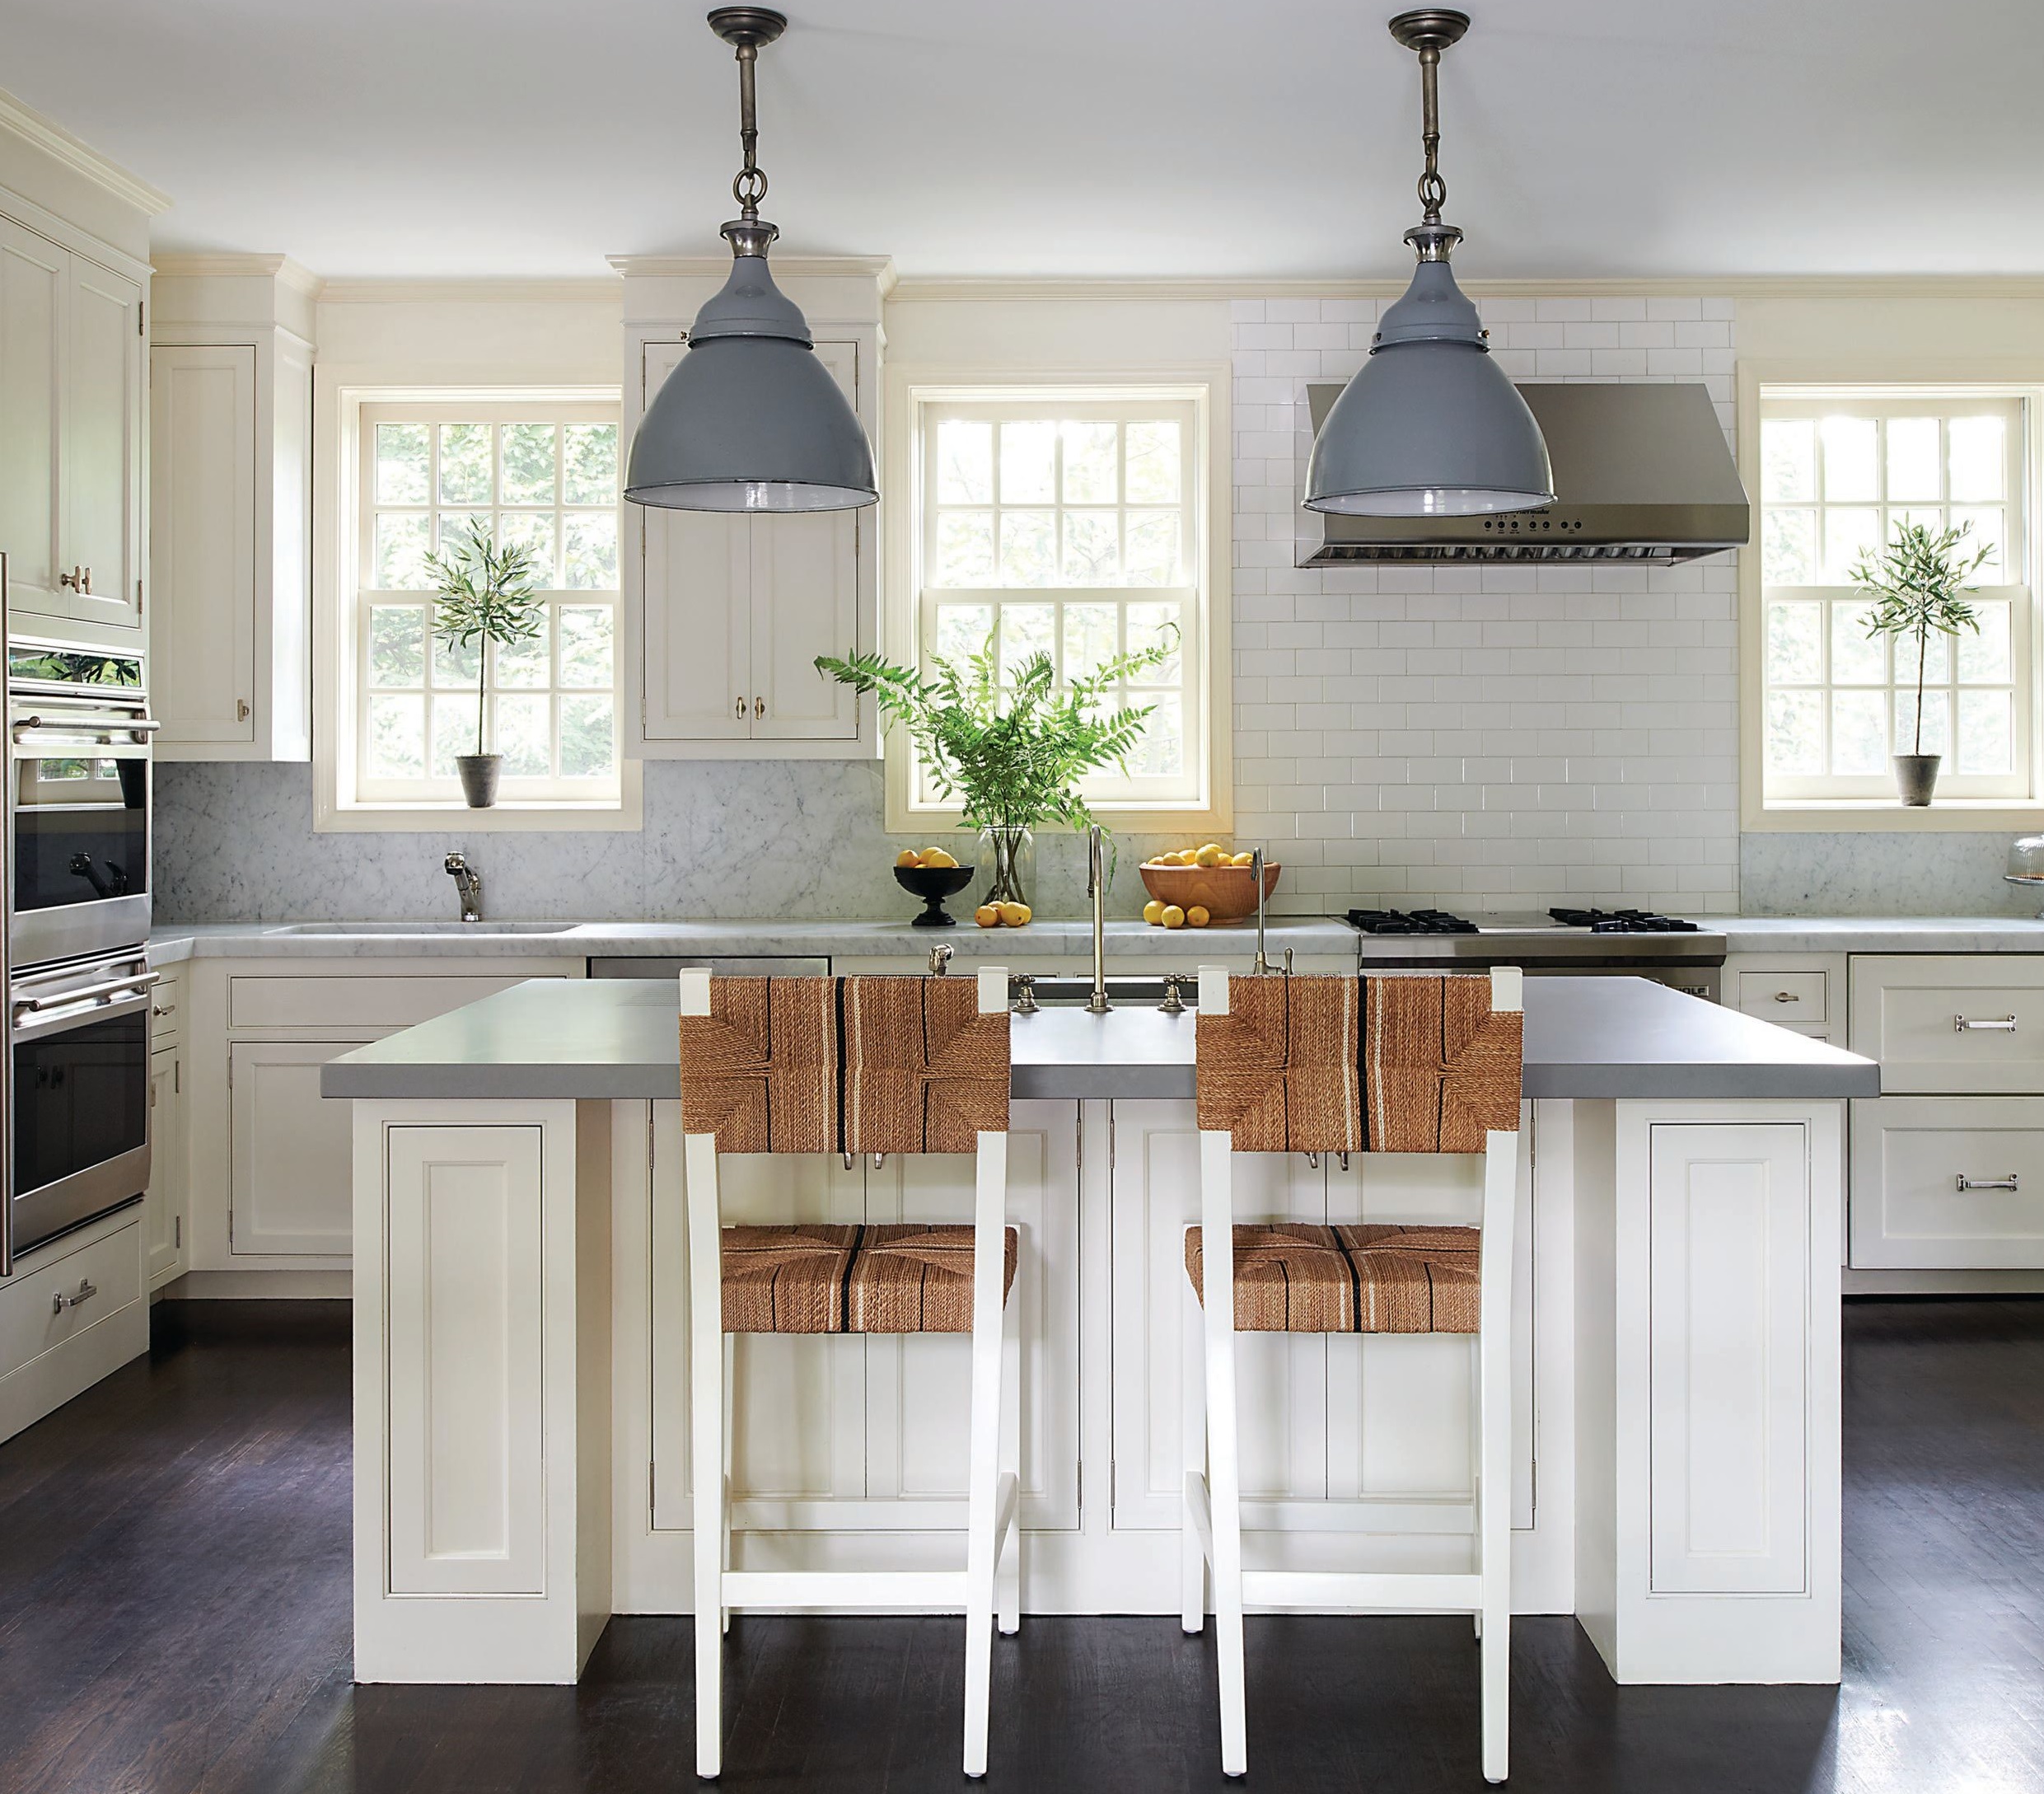 Counter stools in the kitchen were sourced from Serena & Lily. Photographed by Rebecca McAlpin